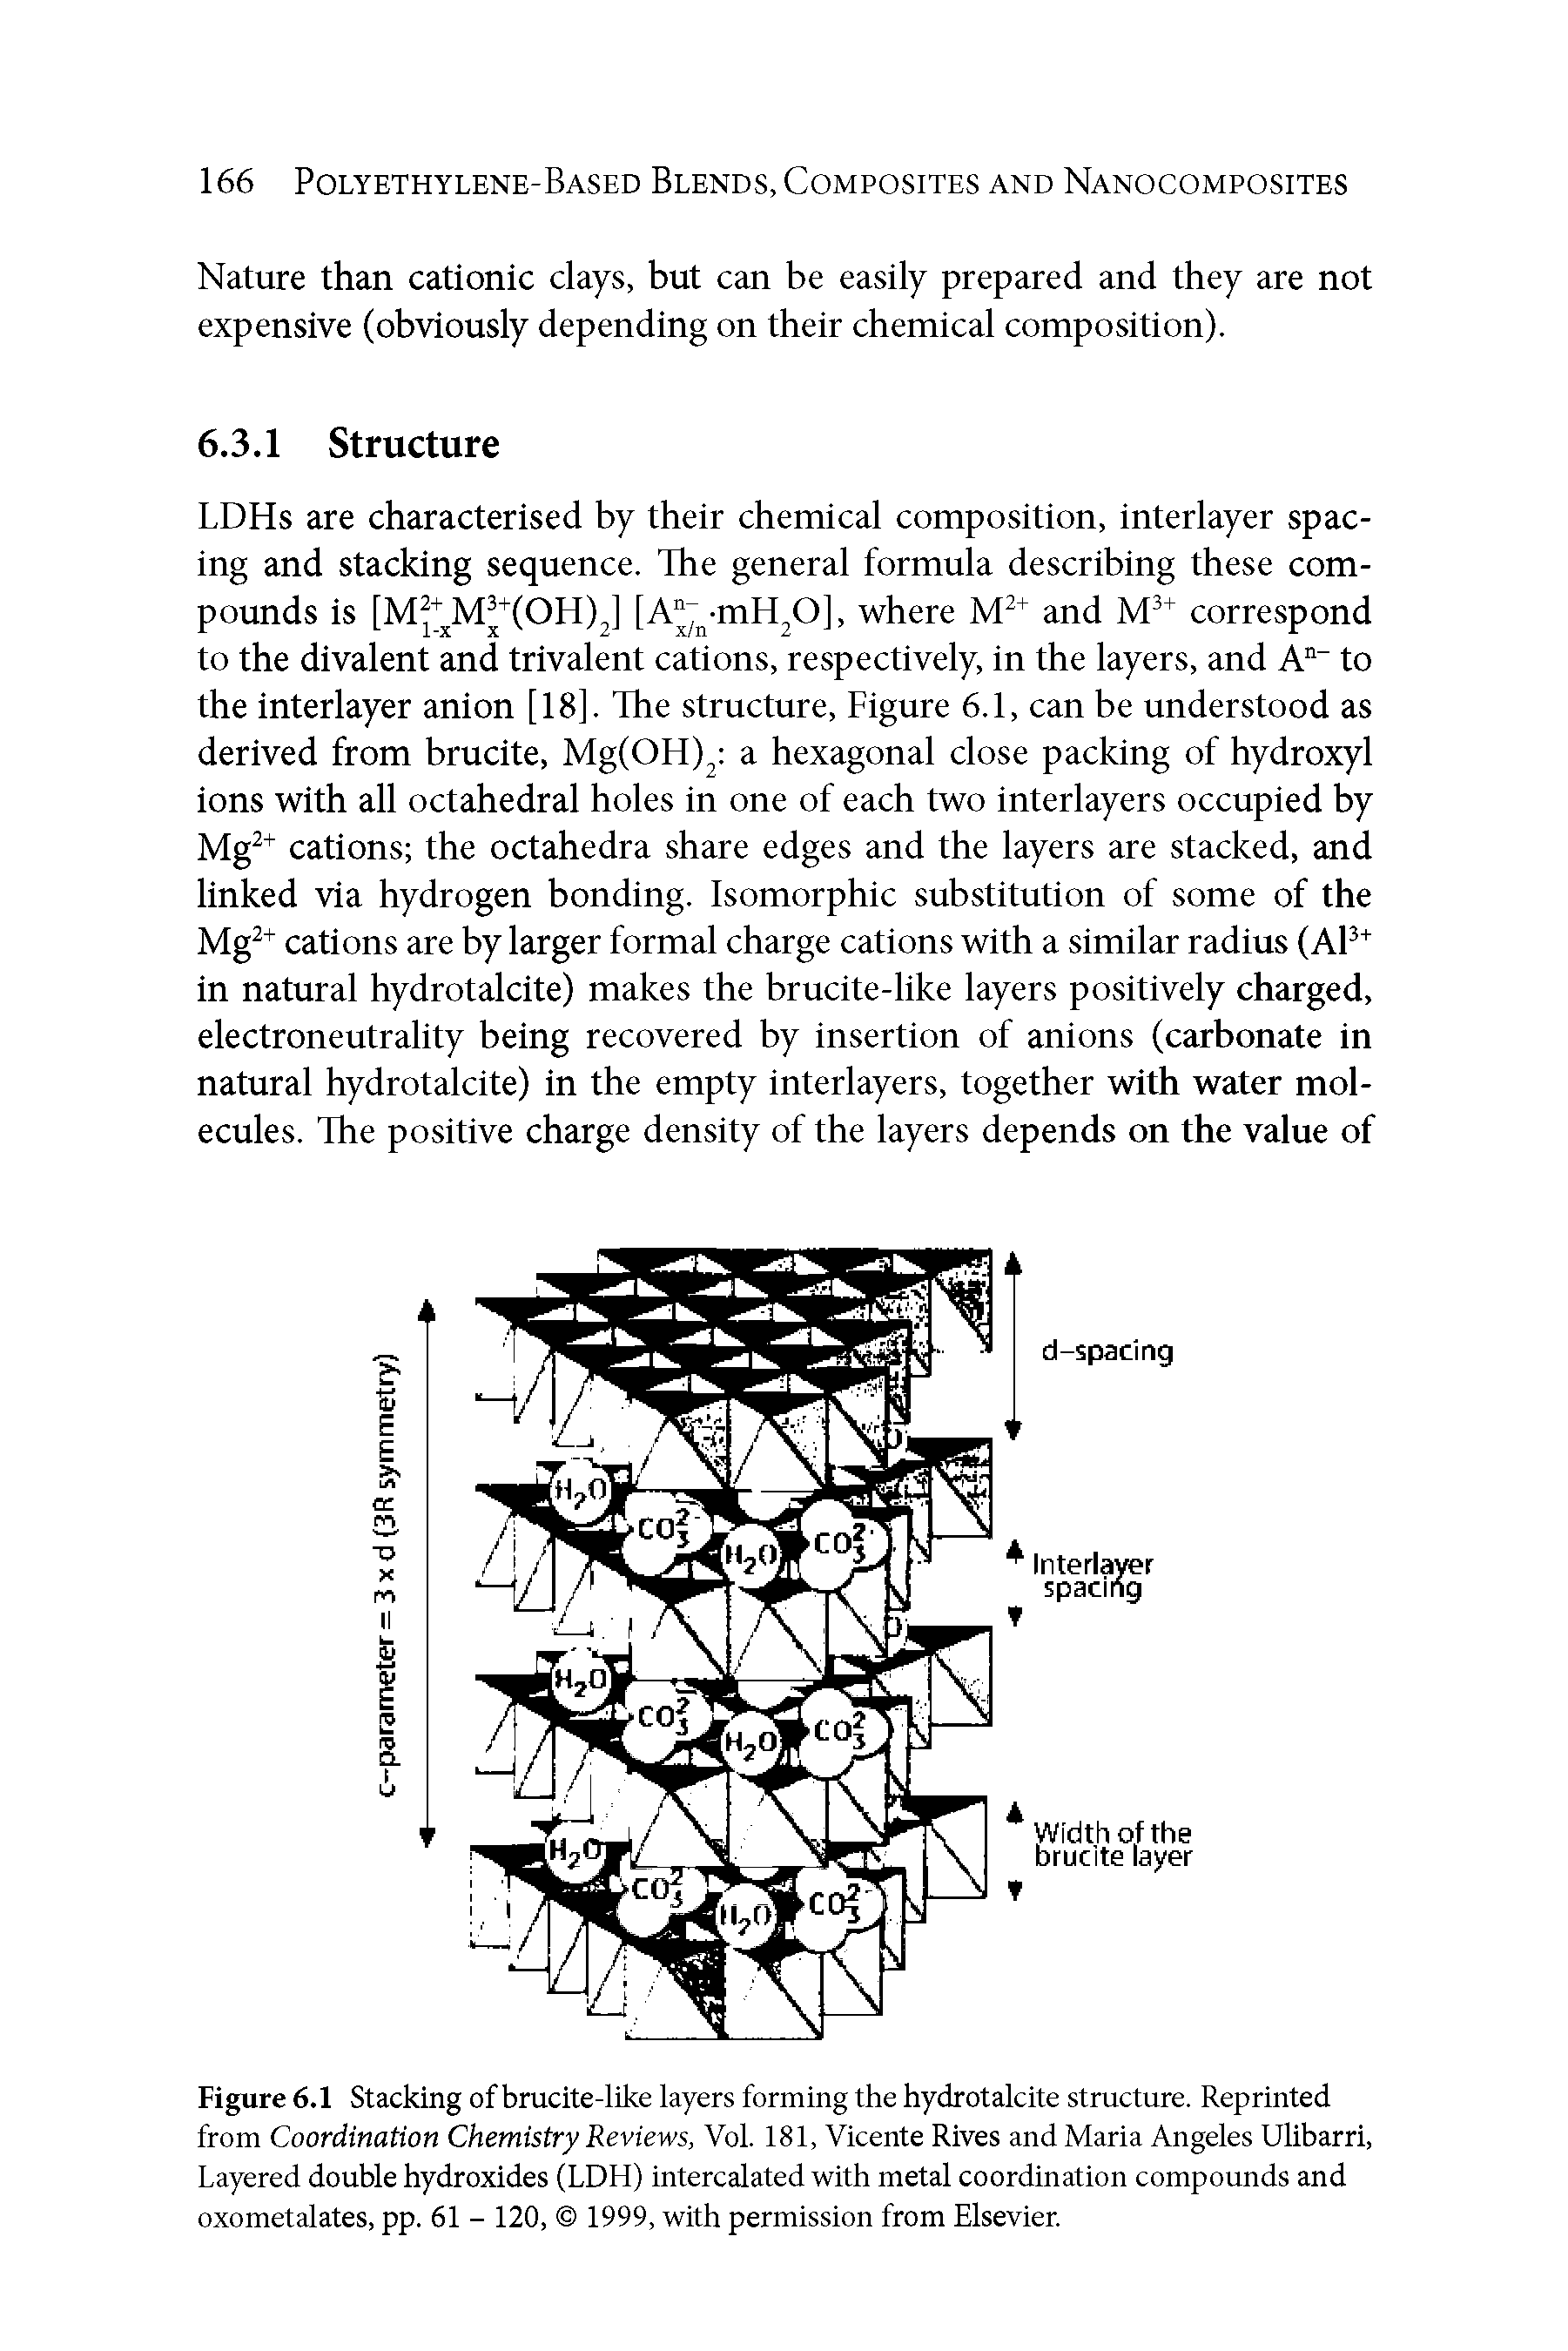 Figure 6.1 Stacking of brucite-like layers forming the hydrotalcite structure. Reprinted from Coordination Chemistry Reviews, Vol. 181, Vicente Rives and Maria Angeles Ulibarri, Layered double hydroxides (LDH) intercalated with metal coordination compounds and oxometalates, pp. 61 - 120, 1999, with permission from Elsevier.